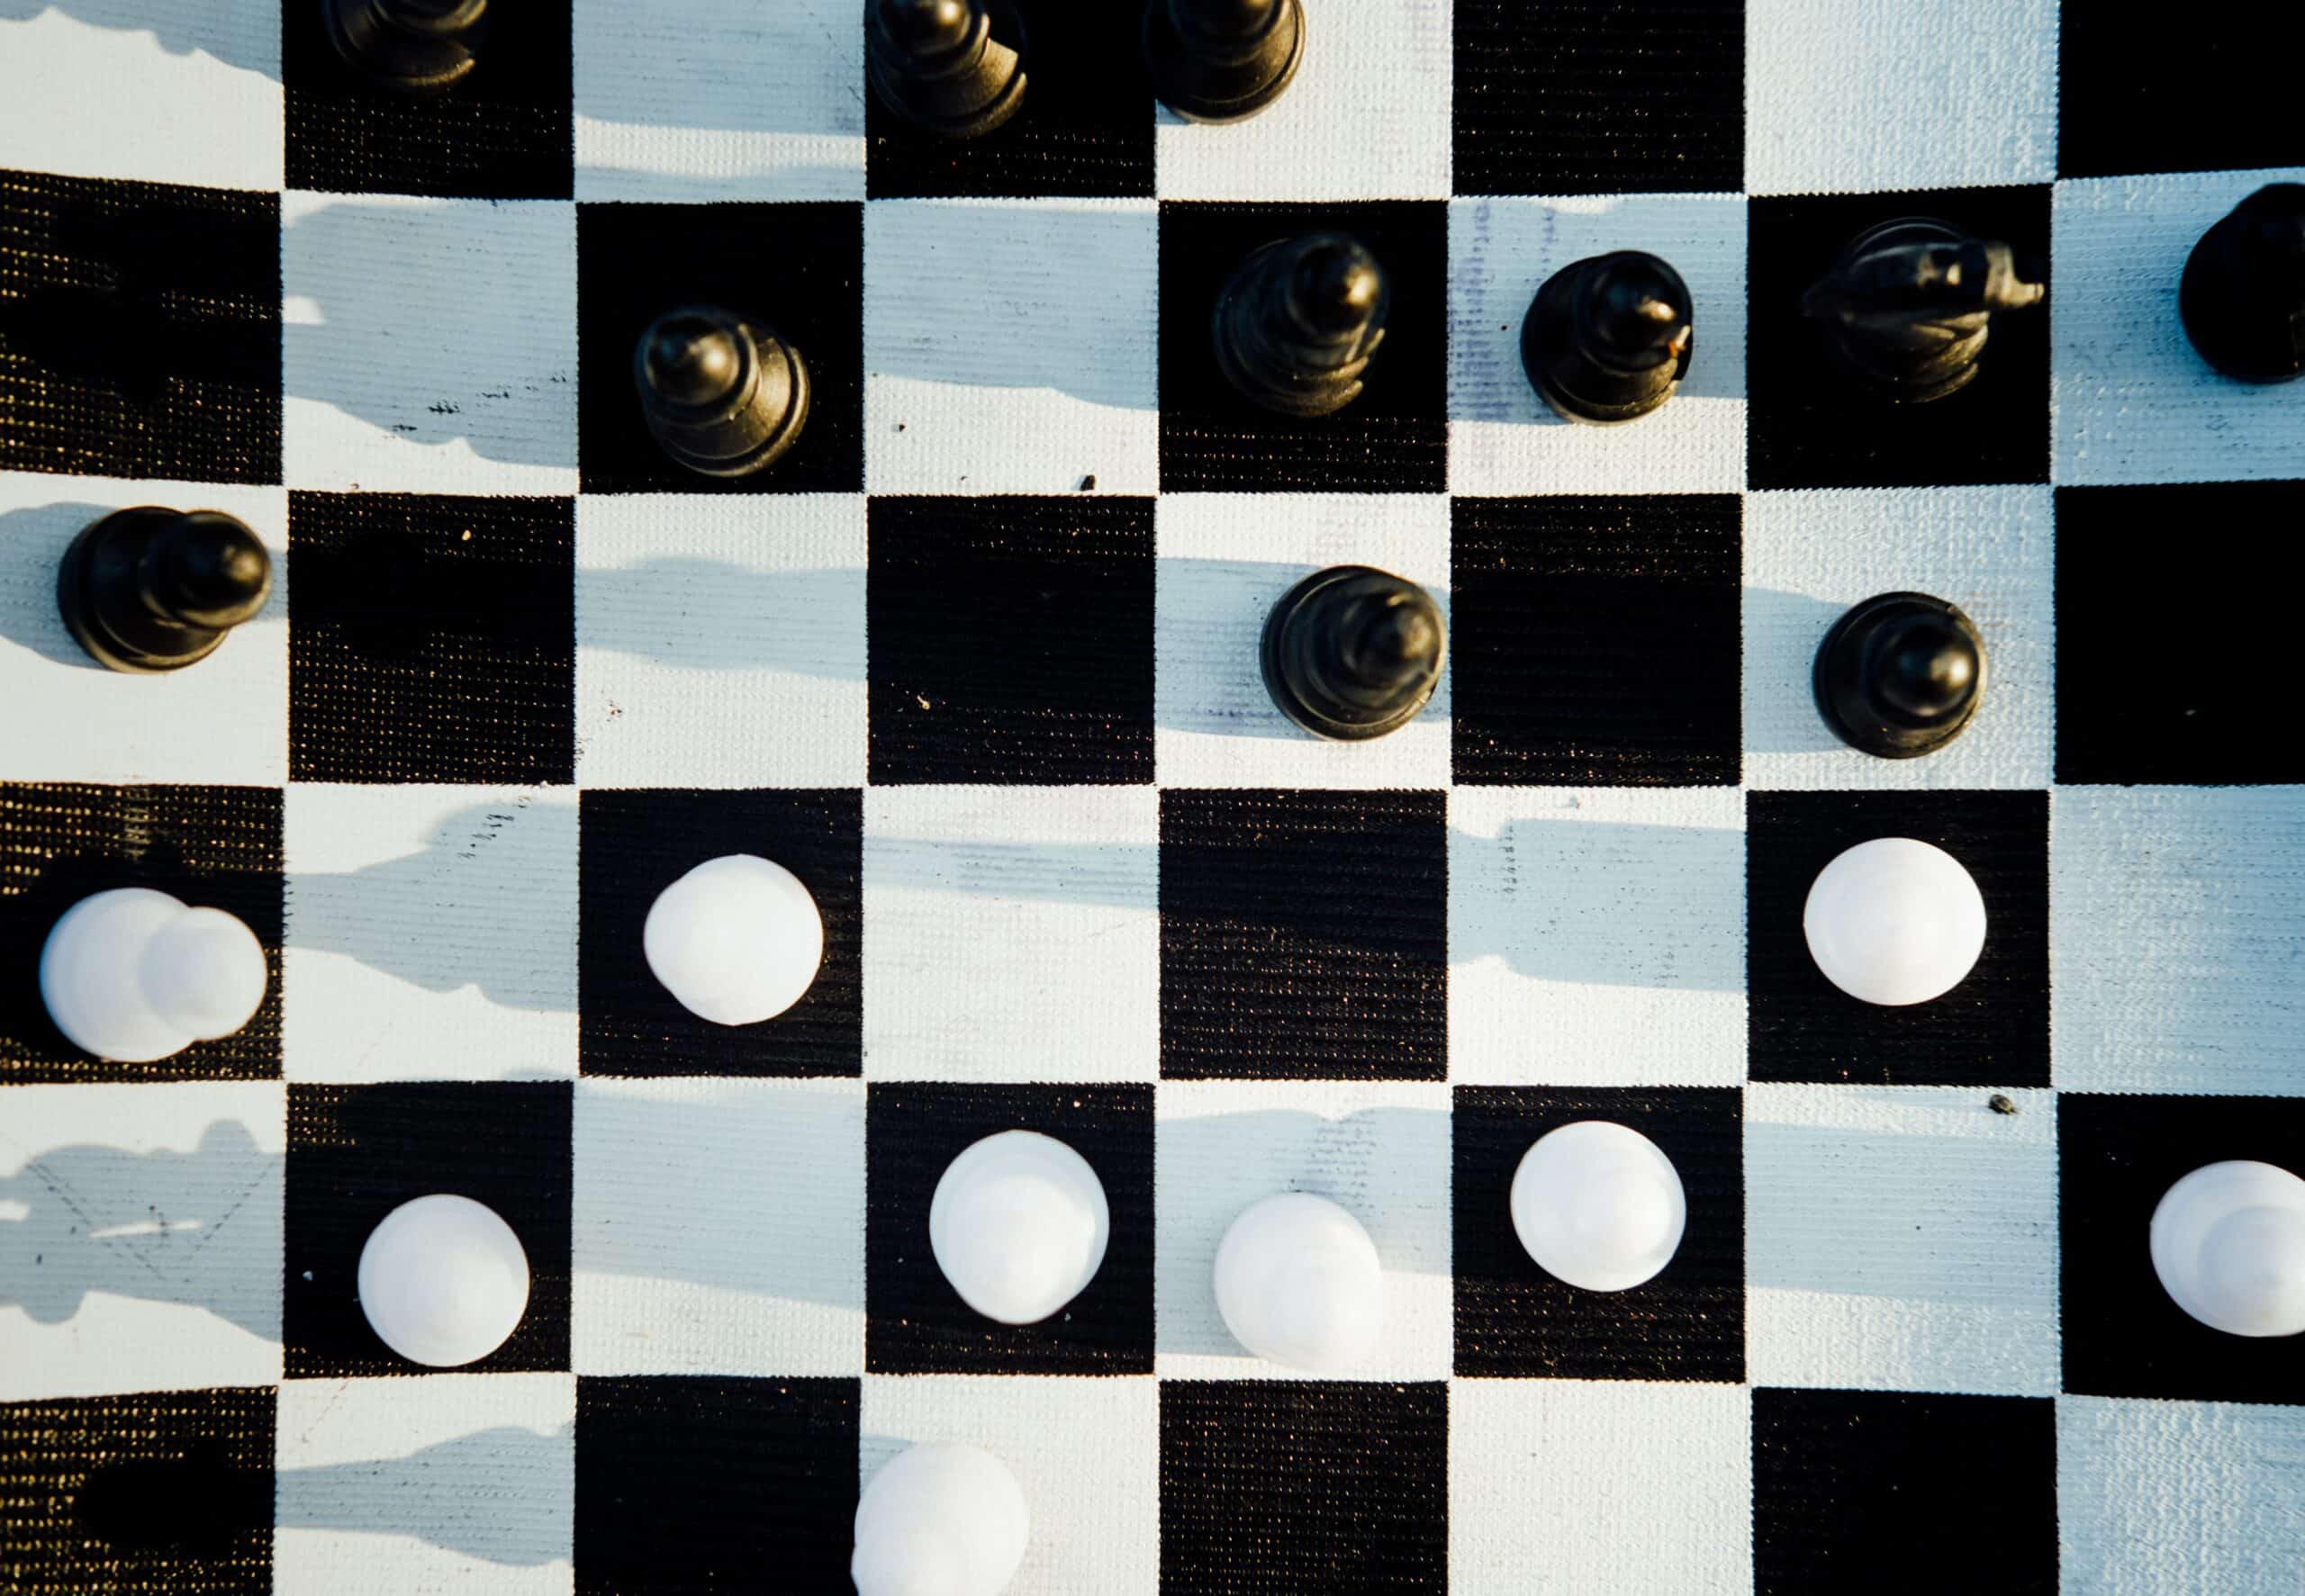 Chess board-EUSBSR & IBSR projects